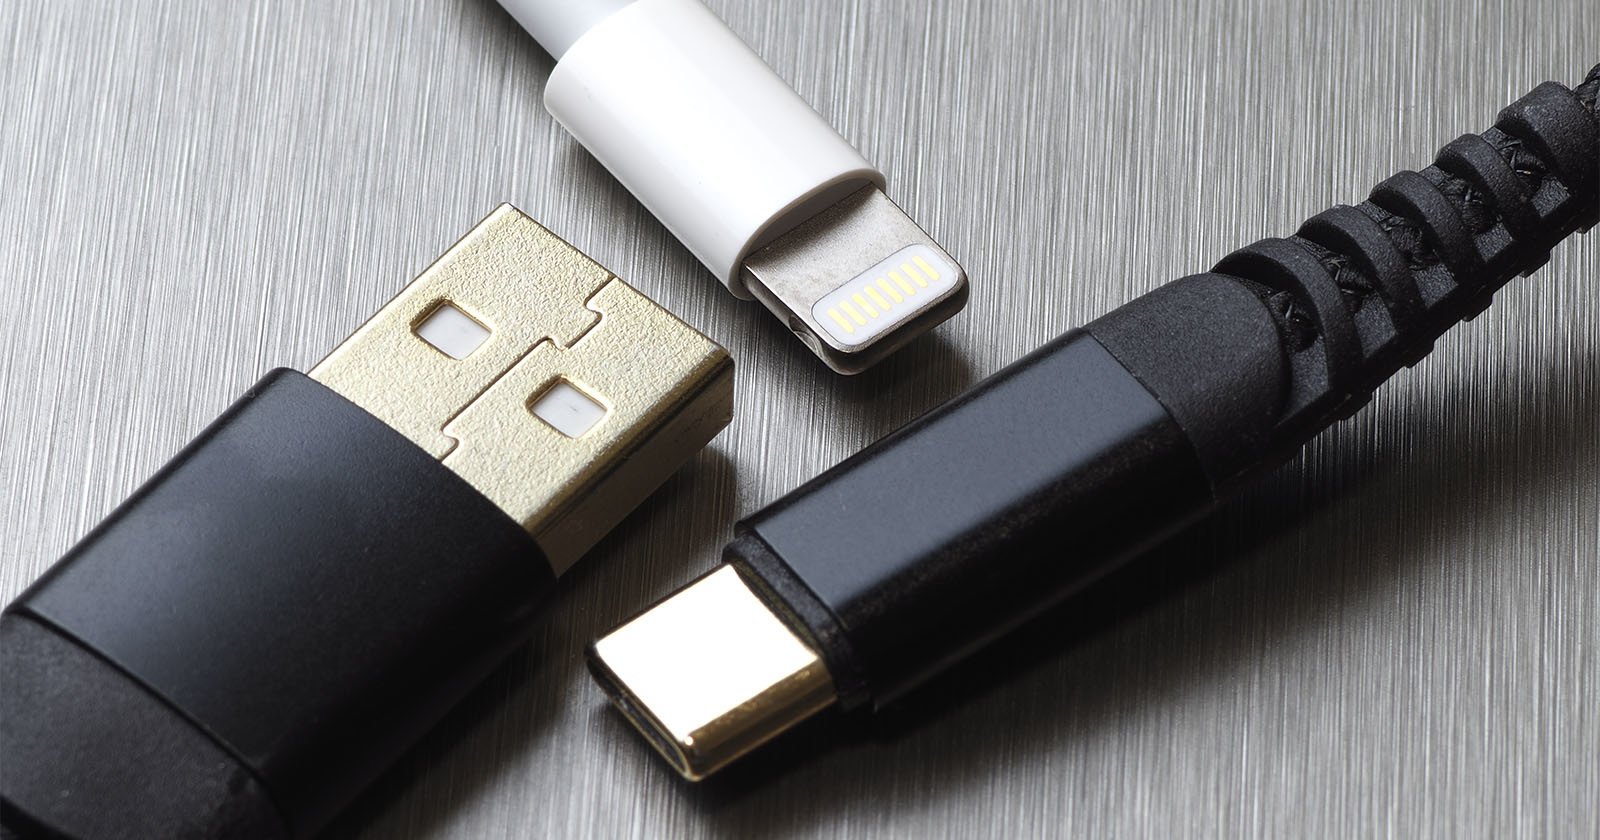 U.S. Senator Reiterates the Need for a Common Mobile Charging Cable